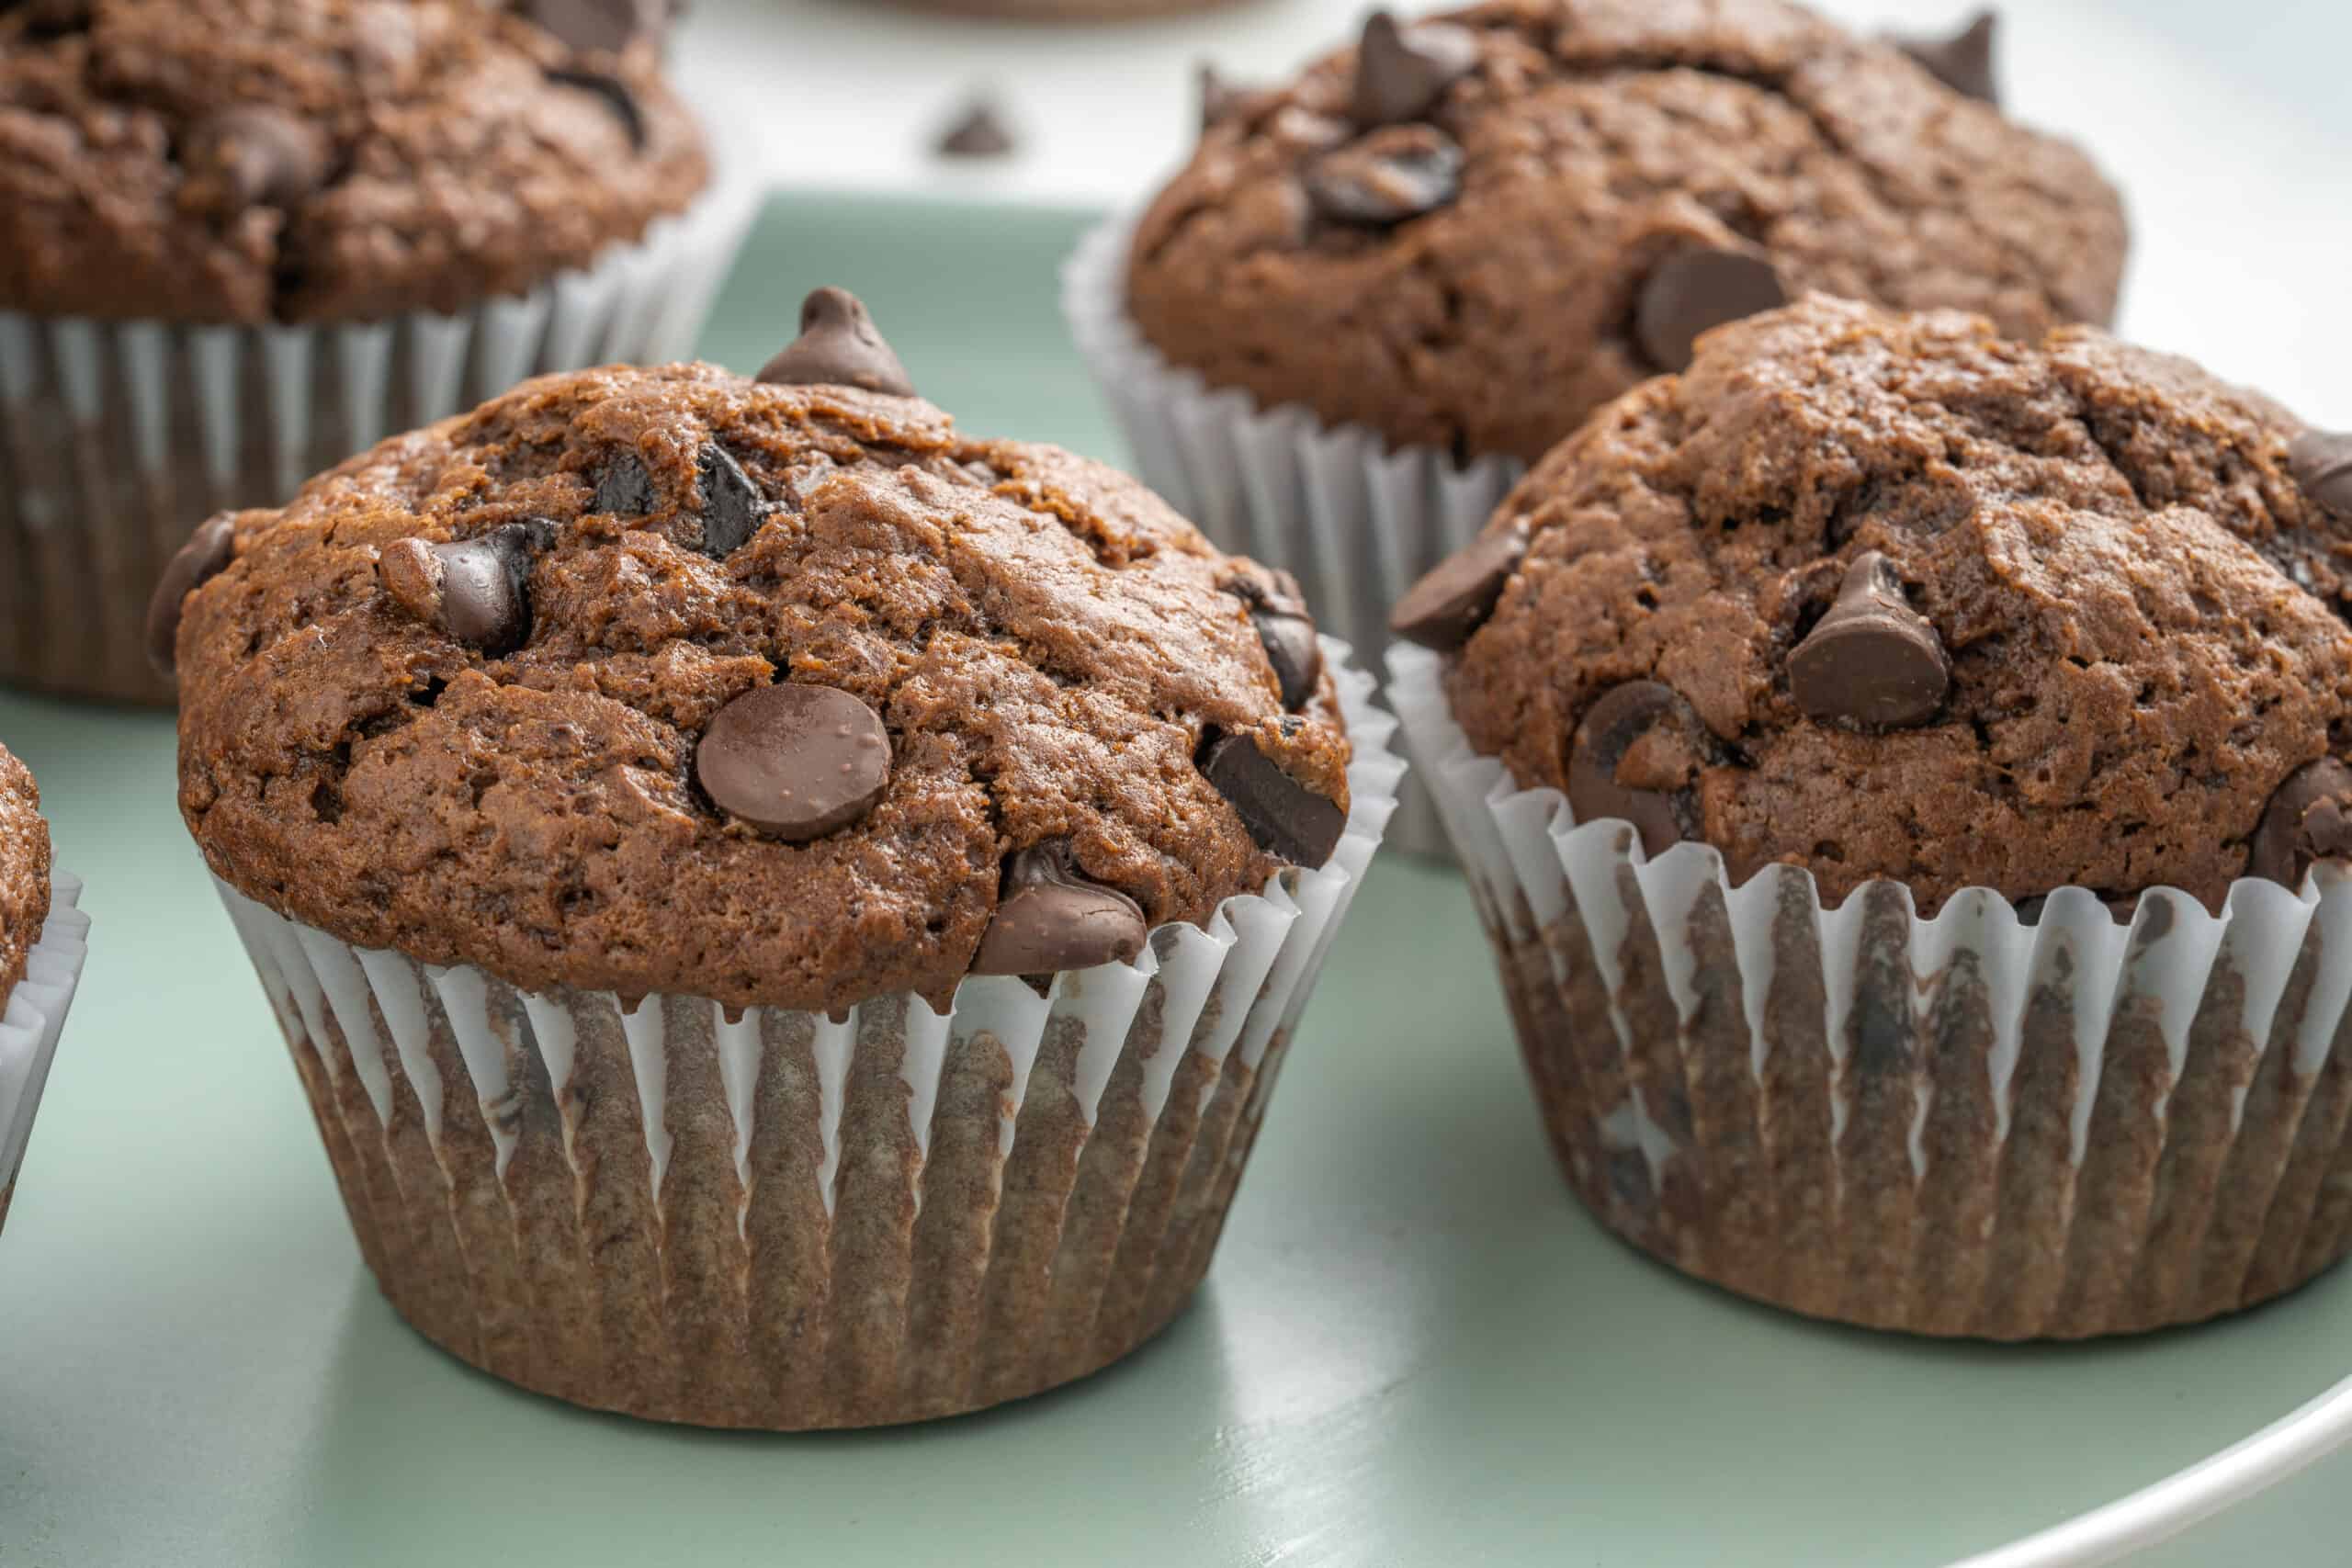 Double chocolate chip muffins

